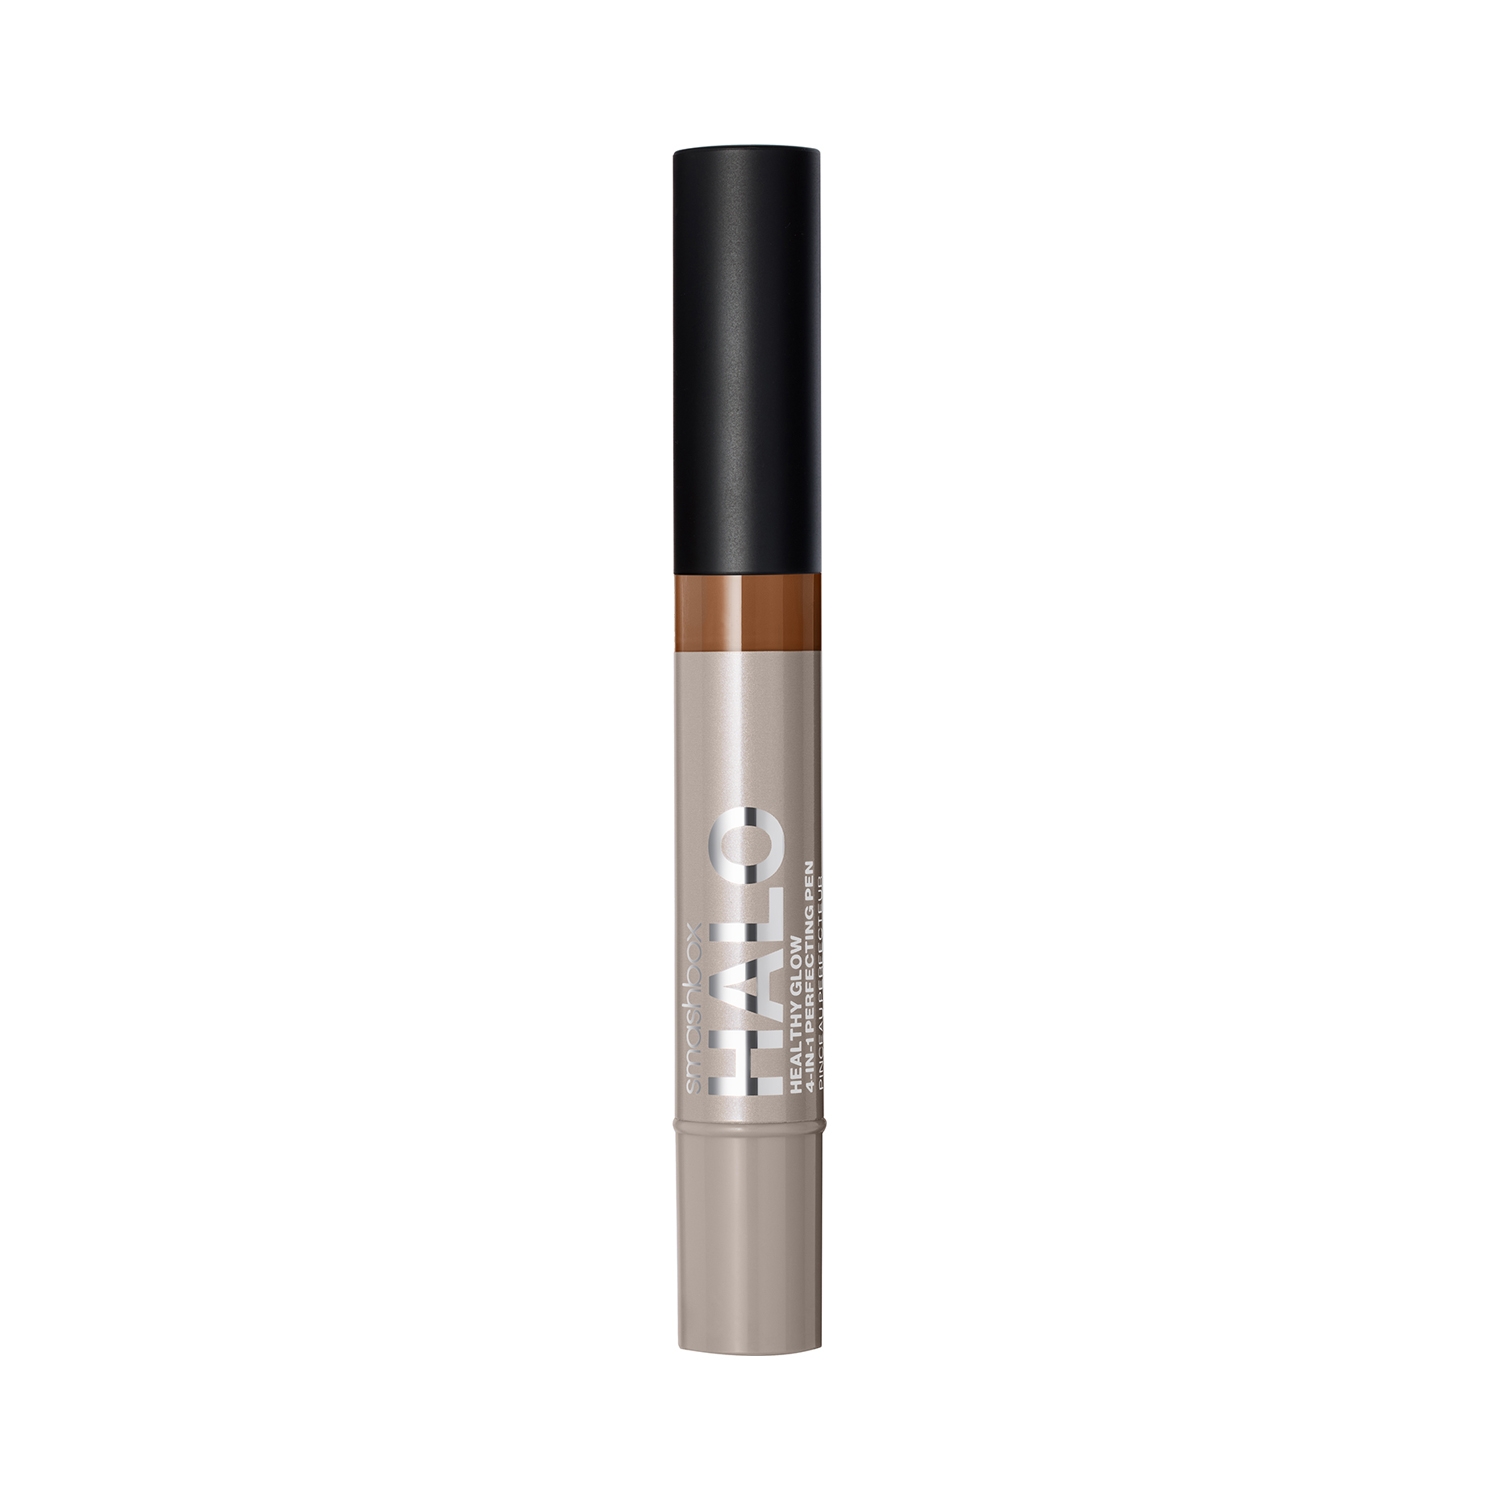 Smashbox Halo Healthy Glow 4-In-1 Perfecting Concealer Pen - T10N (3.5ml)